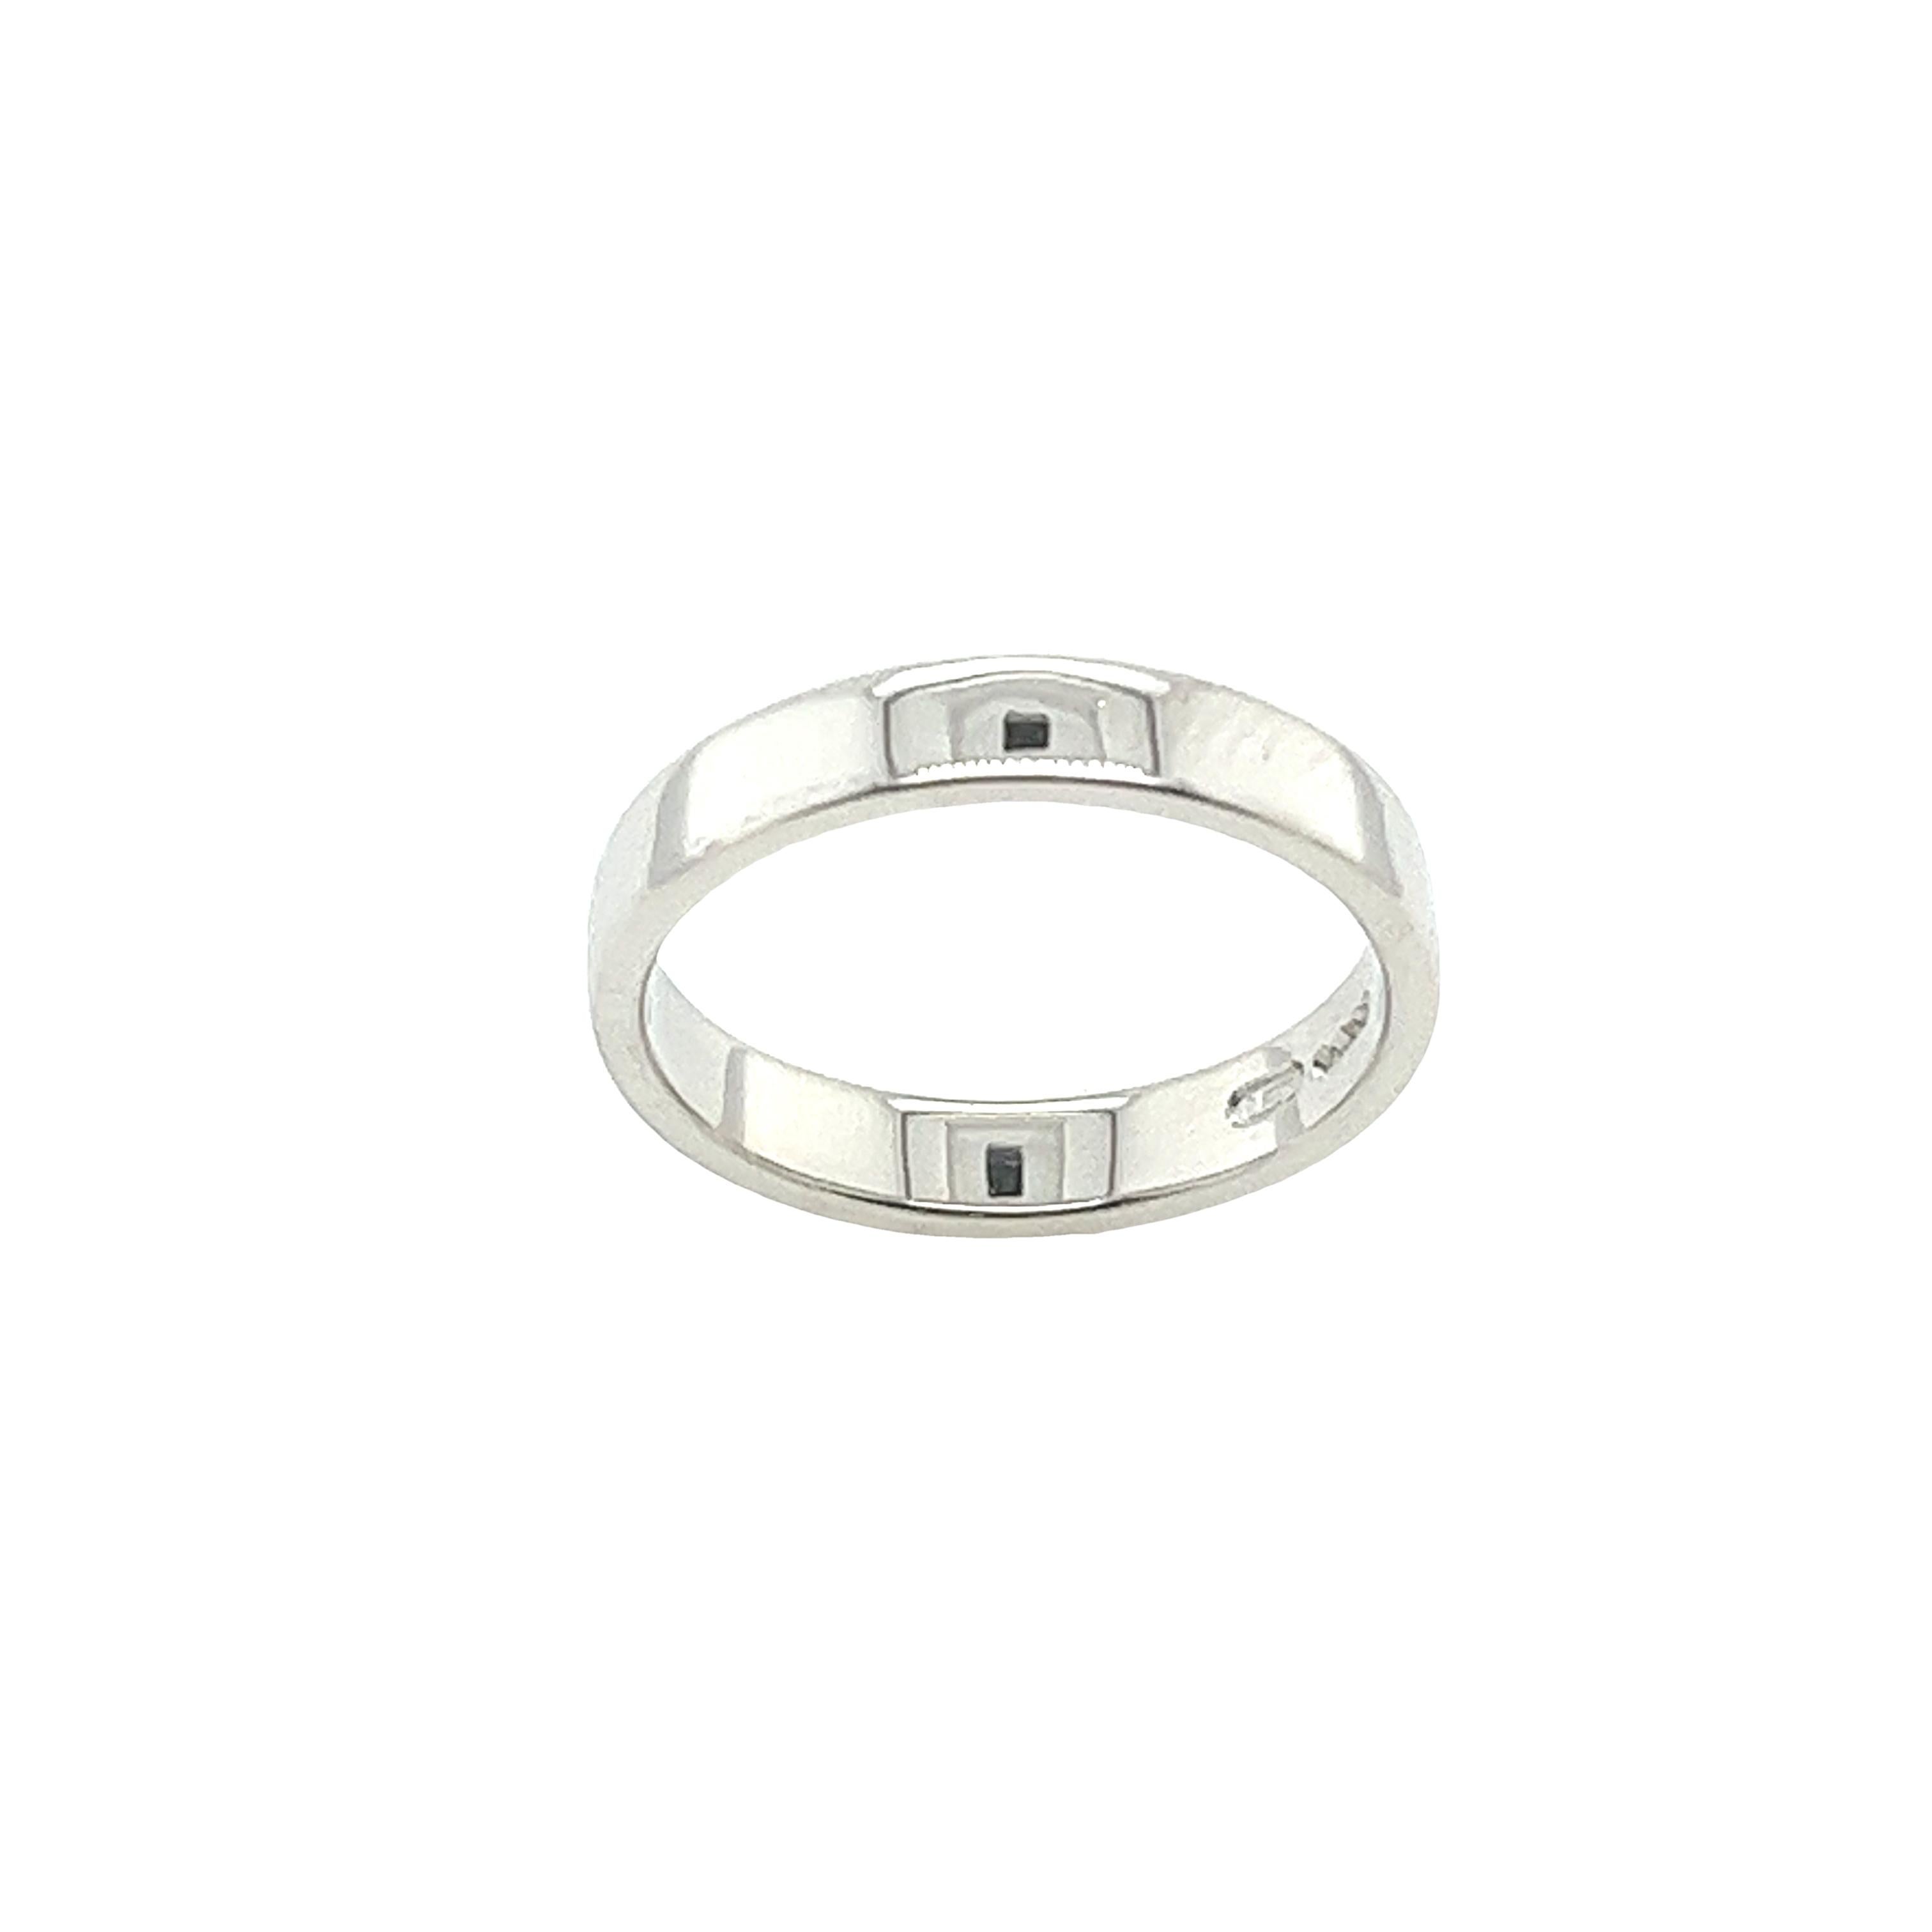 This platinum wedding band is an elegant and sophisticated ring that will never go out of style. 
The 3.90mm wide band is crafted in platinum and features a rounded profile that is comfortable to wear.
Total Weight: 7.6g
Width of Band: 3.90mm 
Depth